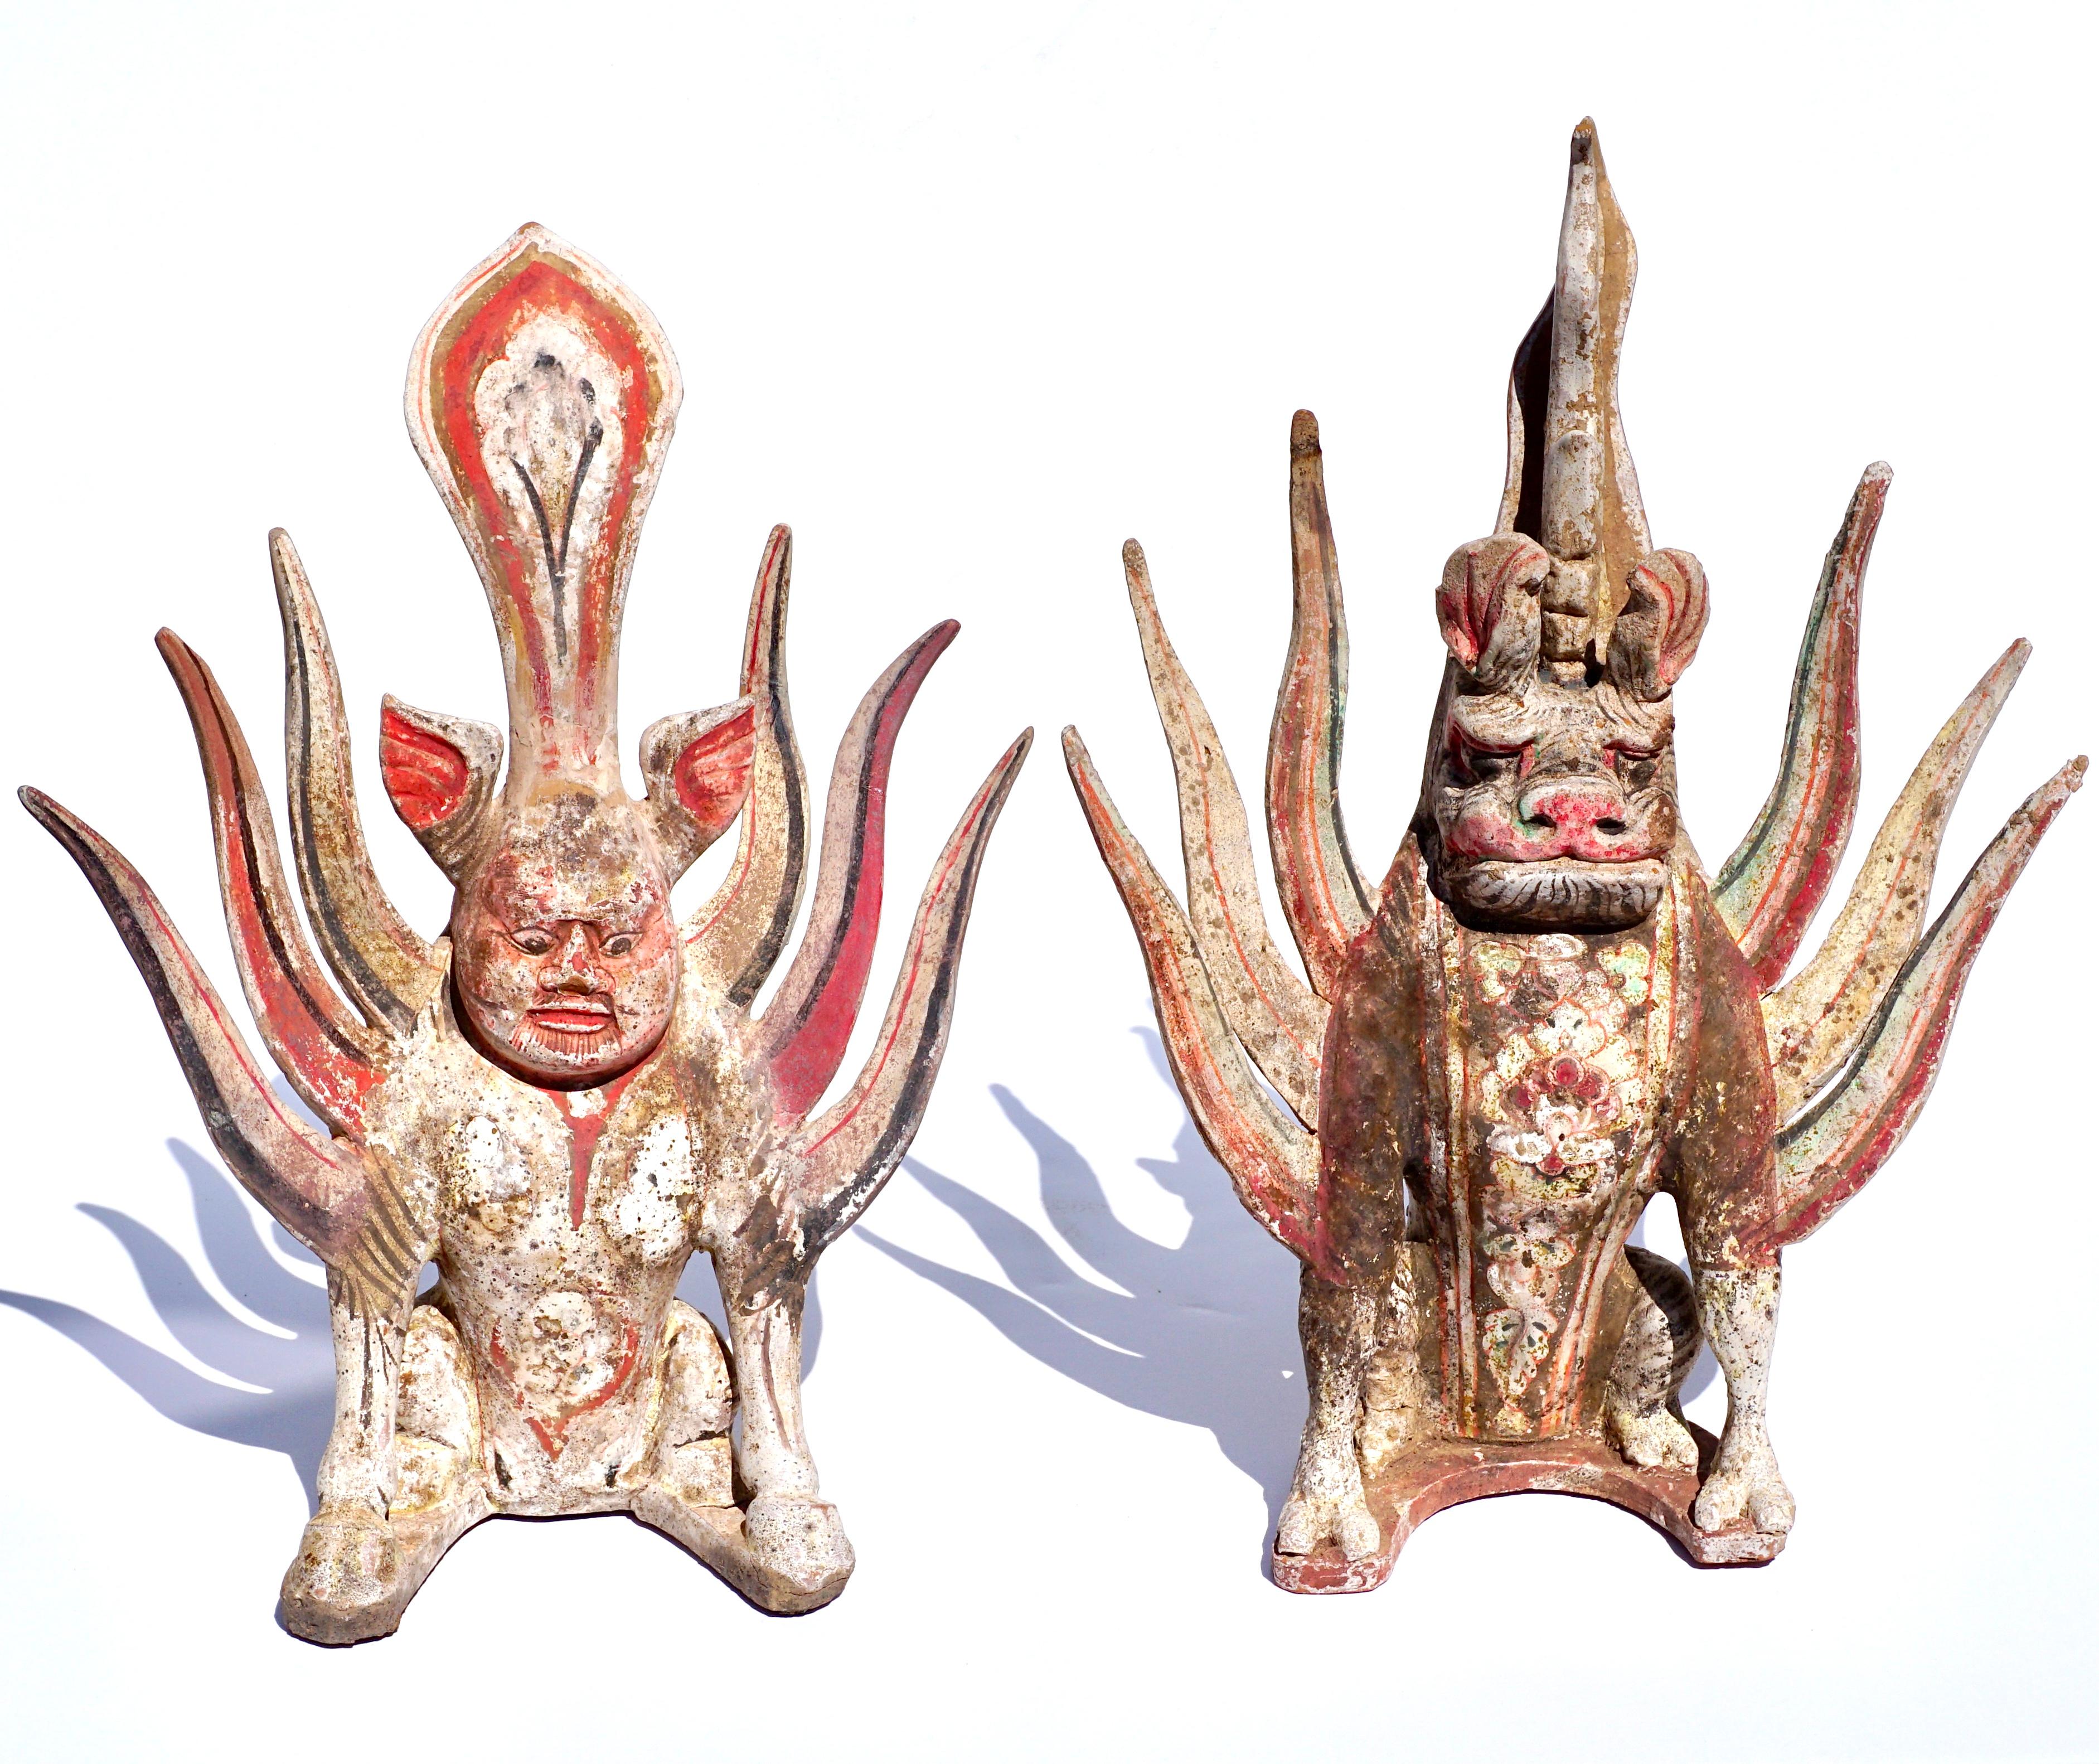 Circa (618 - 906AD) 2 (Two) Tang Dynasty tomb figures representing half human and half beasts. Beautifully polychromed at 13 and 14 inches. Comes with Certificate of Guarantee. I was going to sell them separately but wanted to keep them together